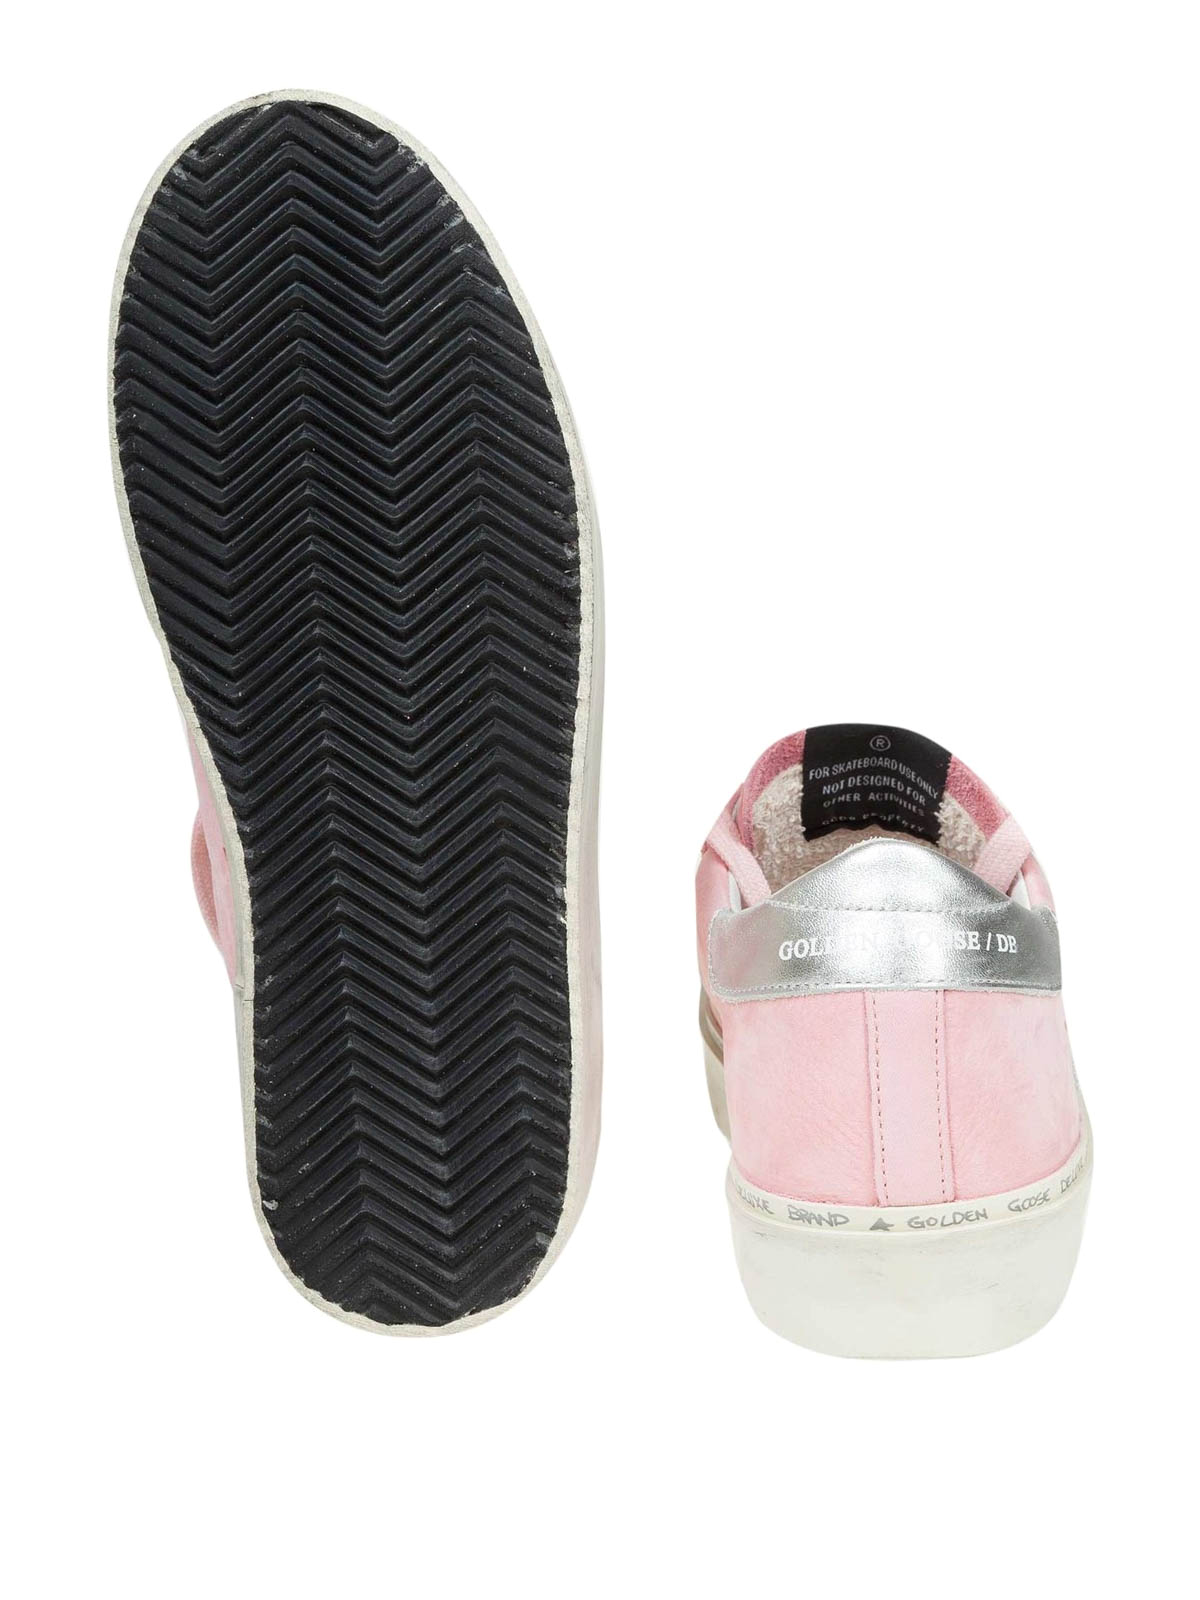 Trainers Golden Goose - Hi Star pink and silver leather sneakers ...